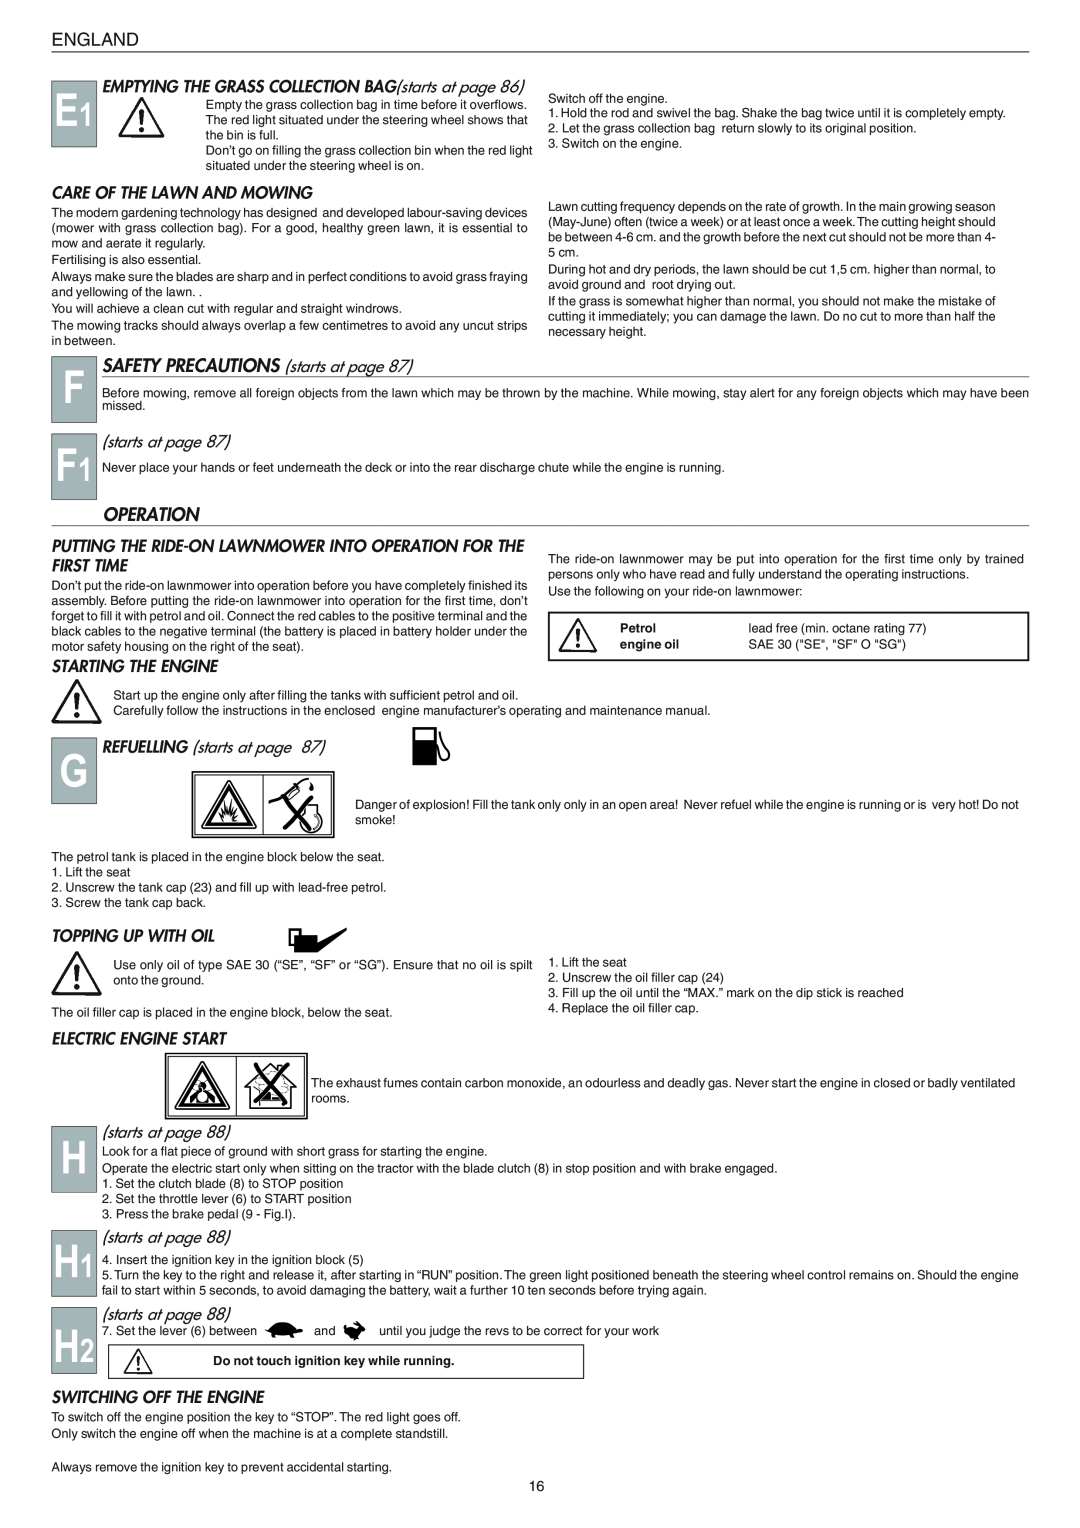 Electrolux 95387831900, 125H instruction manual F F1, SAFETY PRECAUTIONS starts at page, Operation, England 